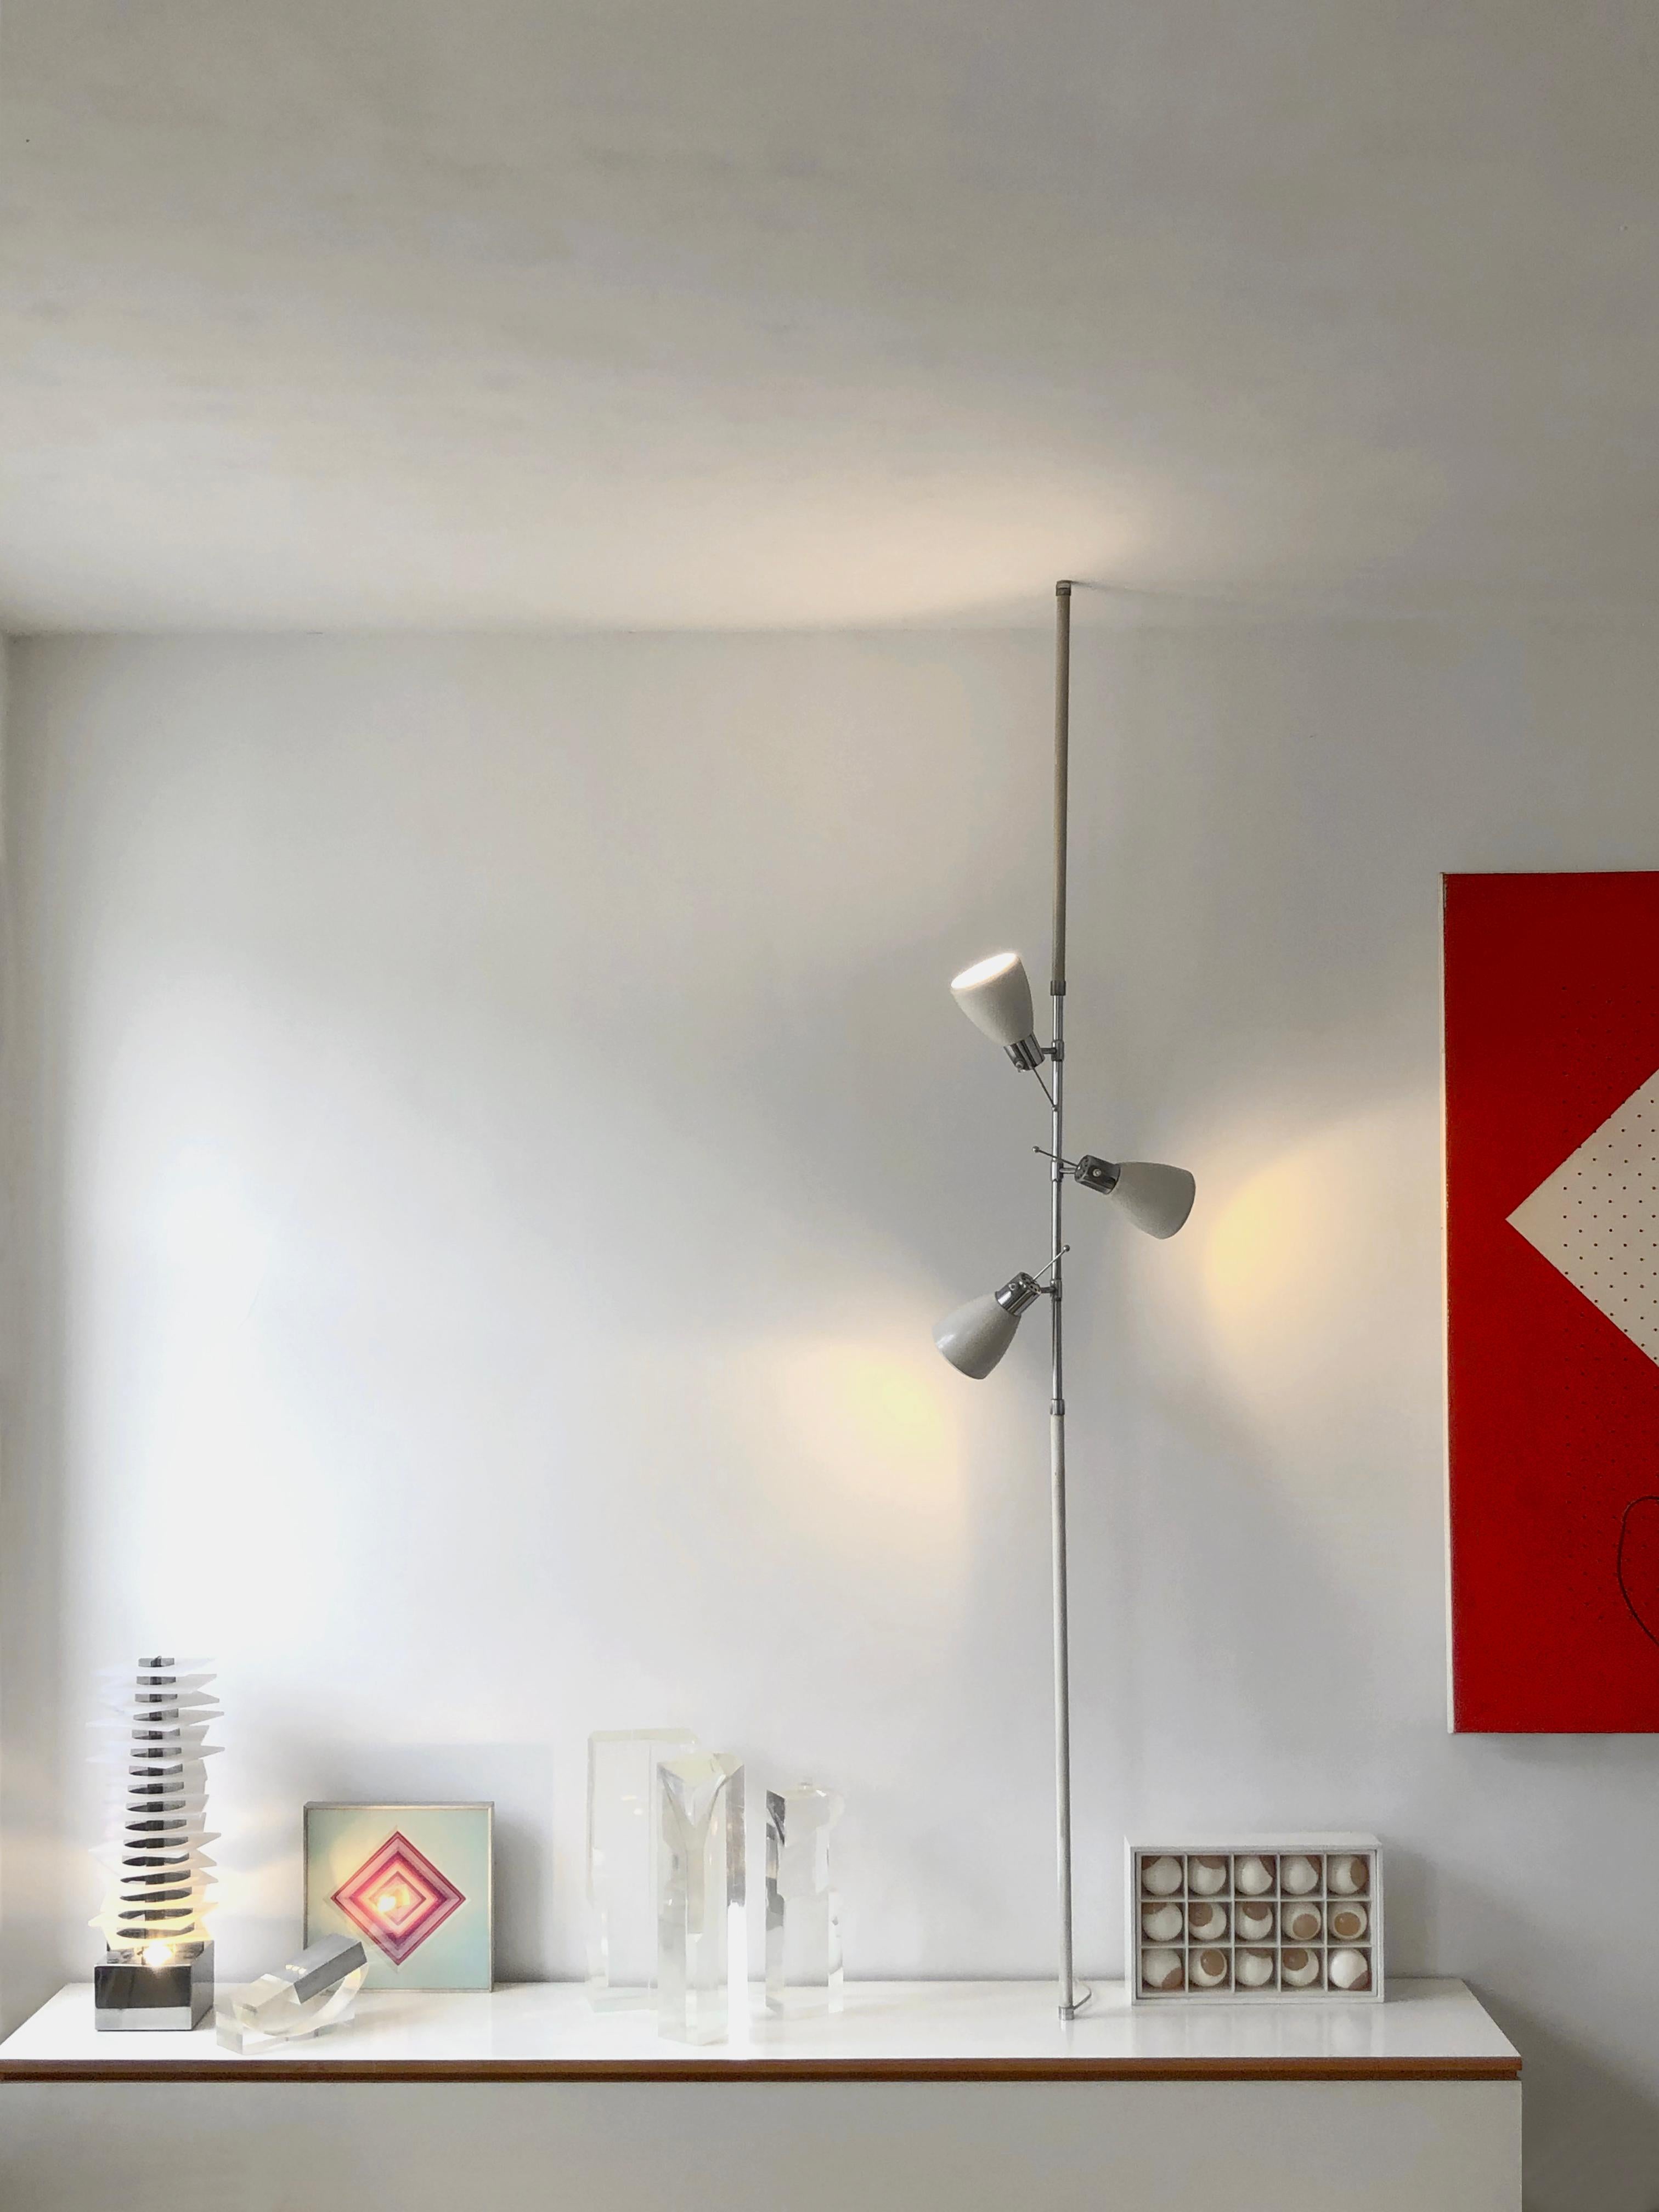 A mid-century-modern space-age, telescopic floor lamp, with 3 orientable lights, to be fixed by pressure between ground (or furniture) and ceiling, in a white laquer and chrome finish version, iconic model by Etienne Fermigier, produced by Monix,